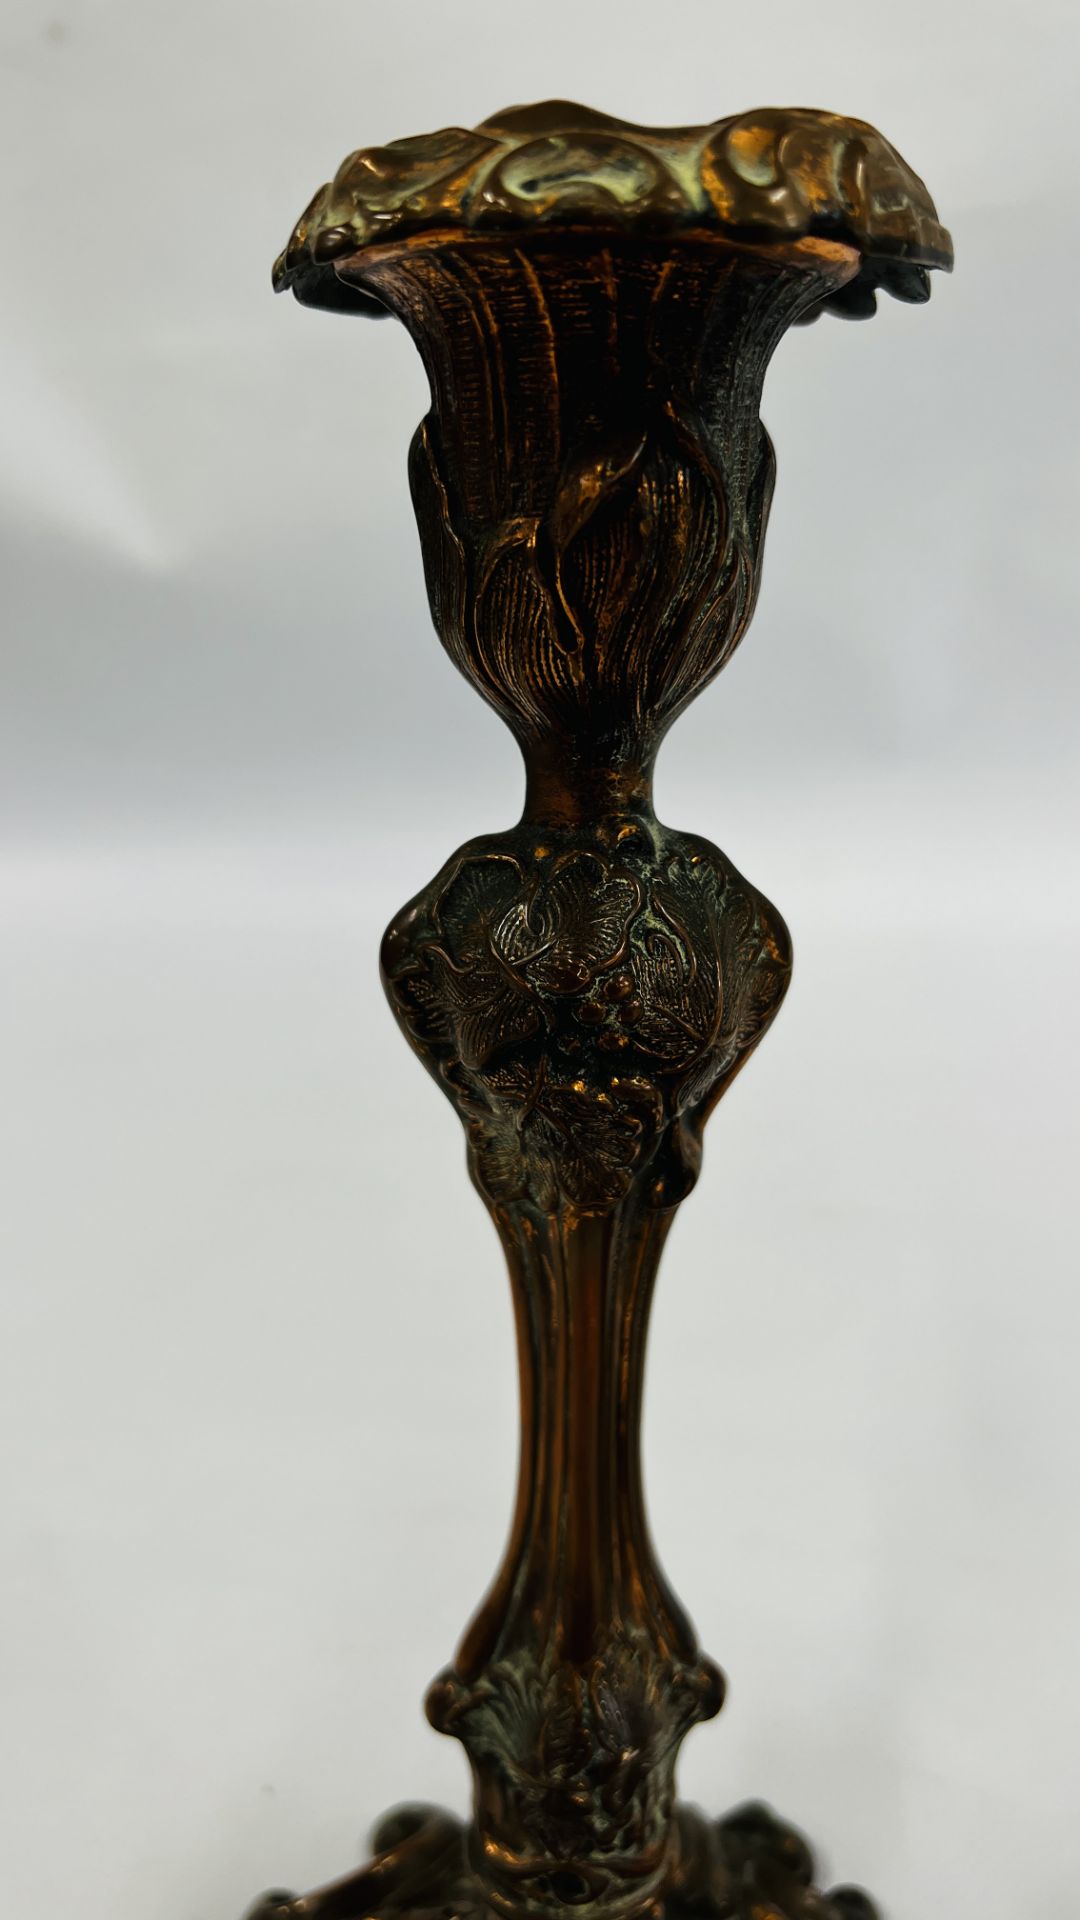 A PAIR OF ORNATE C19TH COPPER CANDLESTICKS WITH DETACHABLE SCONCES - HEIGHT 27CM. - Image 8 of 20